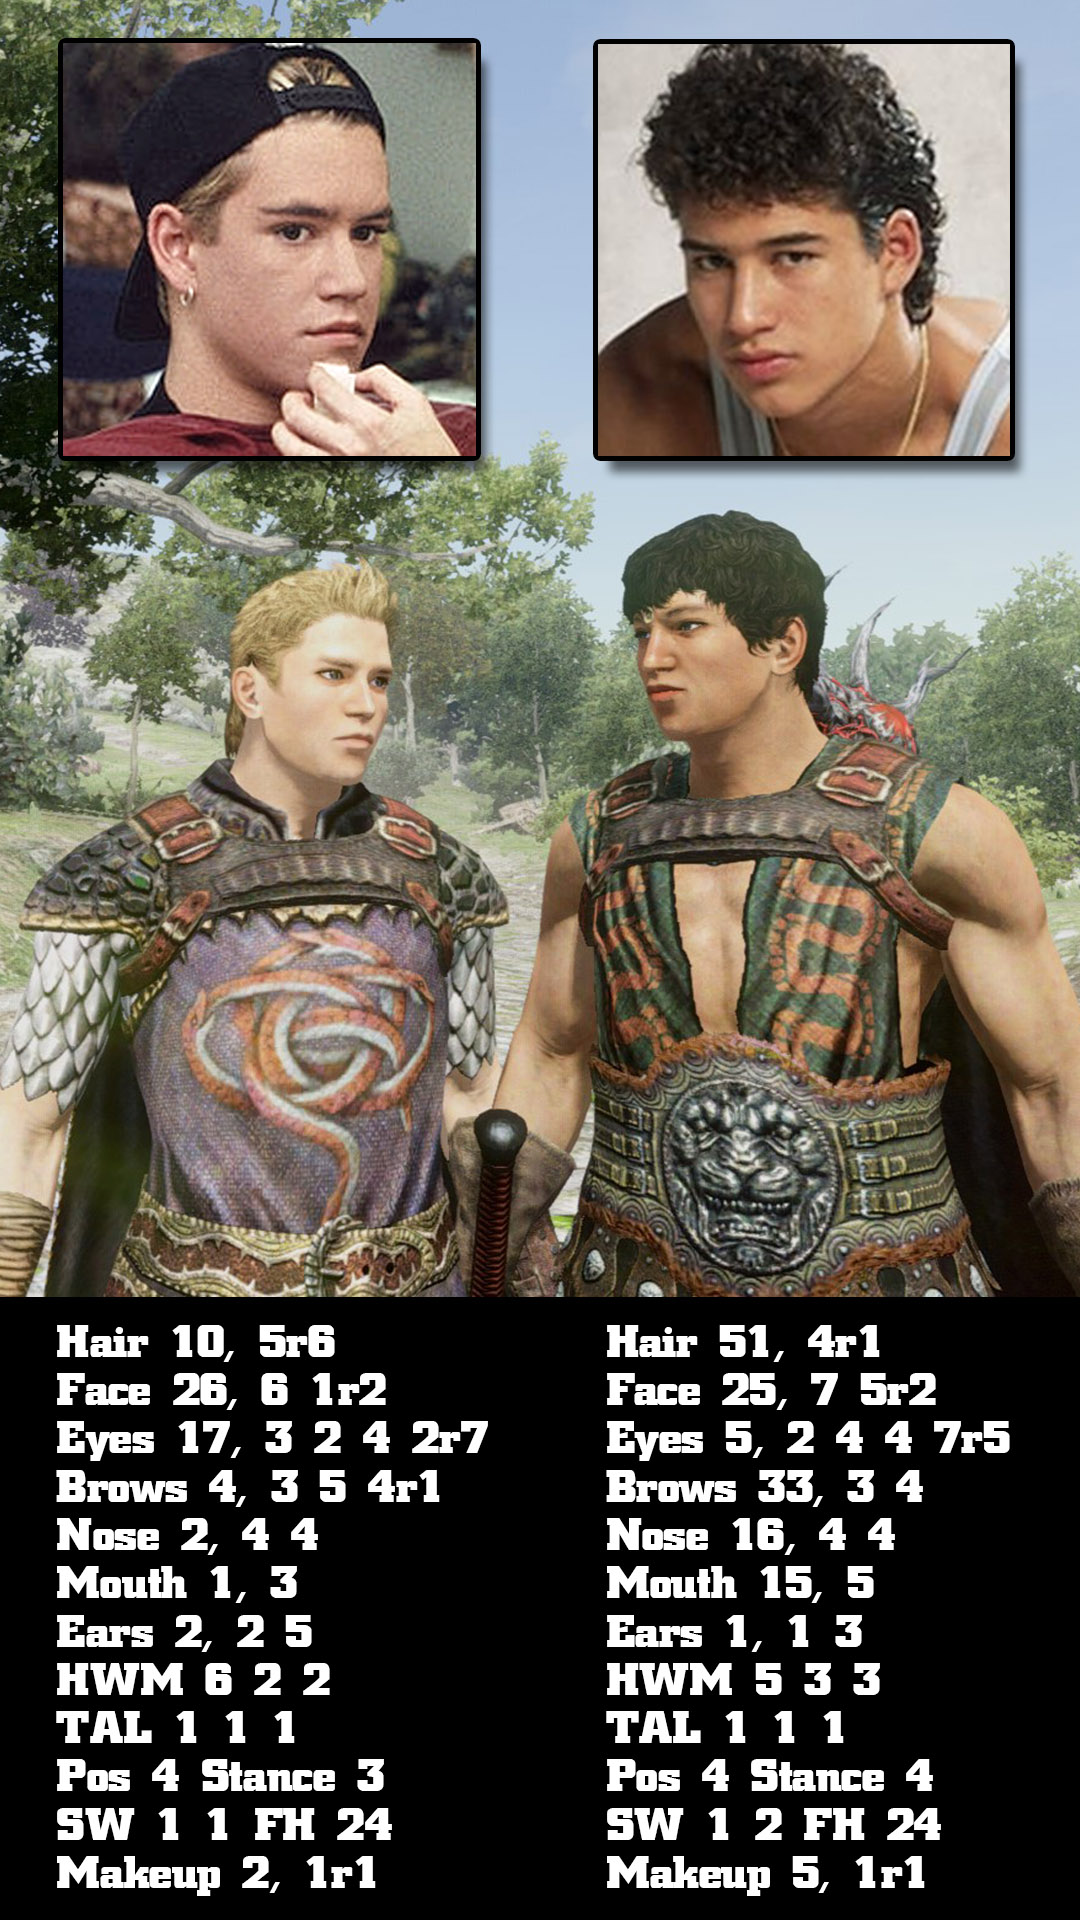 Dragon Dogma Dark Arisen - muscle - Hair 10, 5rb Face 26, 6 112 Eyes 17, 324 217 Brows 4, 3 5 4r1 Nese 2, 44 Mouth 1, 3 Ears 2, 25 Hwm 6 2 2 Tal 1 11 Pos 4 Stance 3 Sw 1 1 Fh 24 Makeup 2, 1r1 Hair 51, 4r1 Face 25, 7 5r2 Eyes 5, 24 4 7r5 Brows 33, 34 Nose 